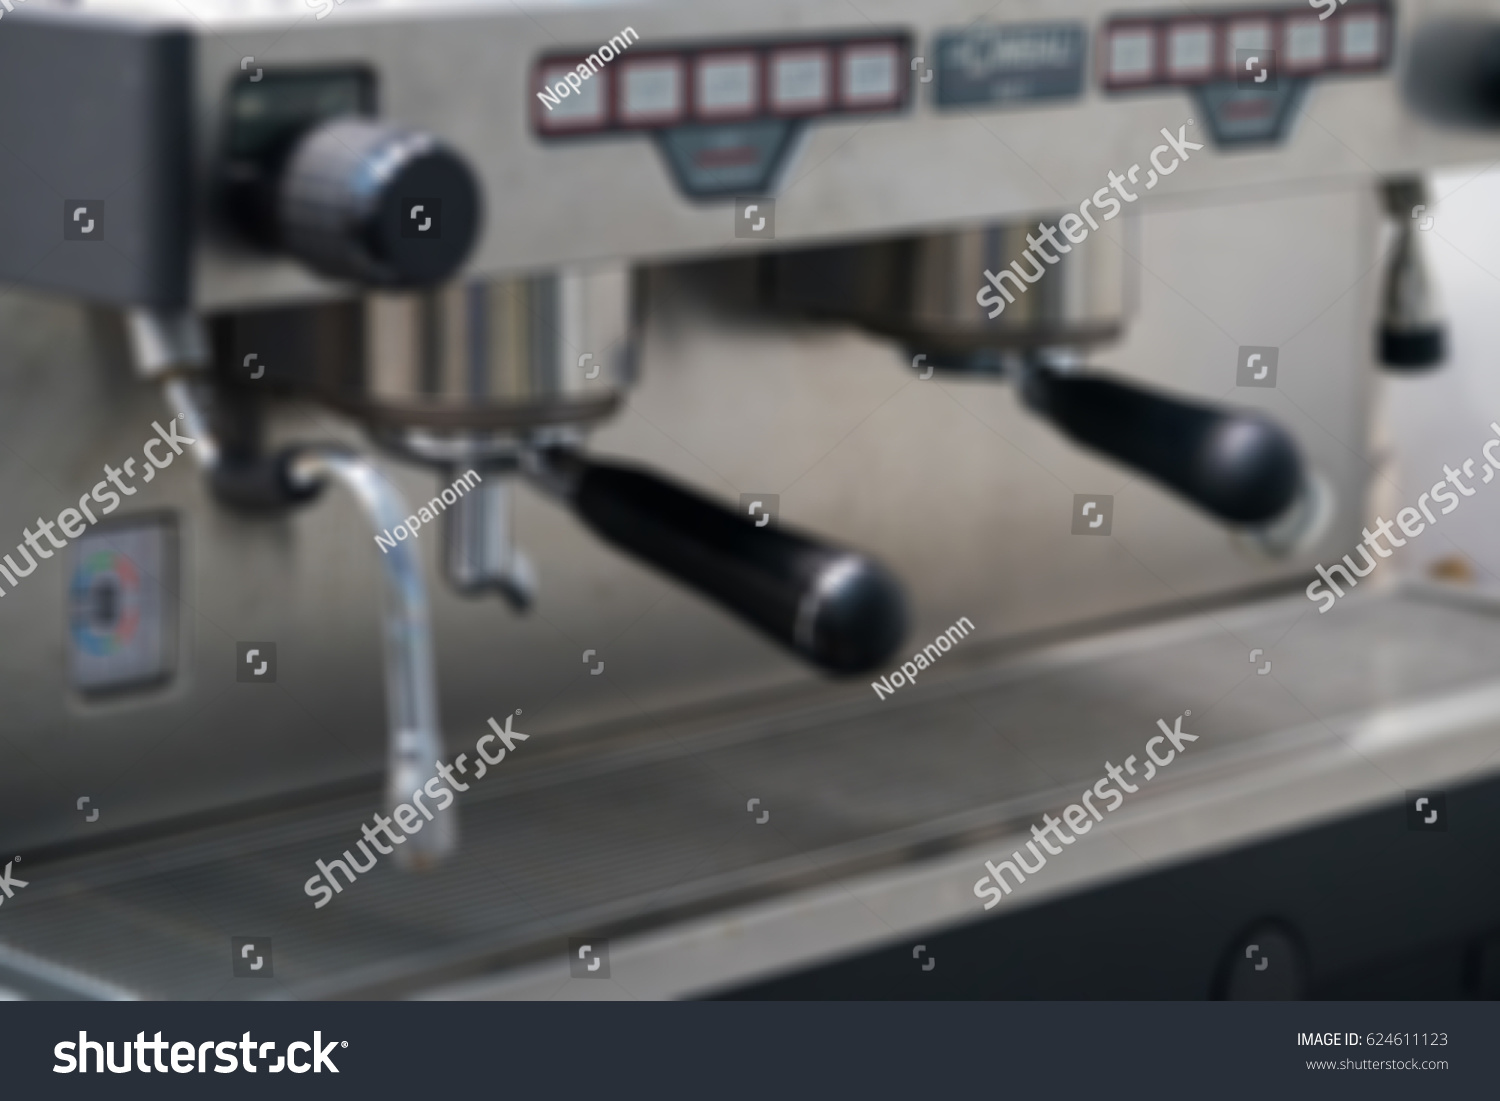 Abstract Blur Background Coffee Maker Stock Photo 624611123